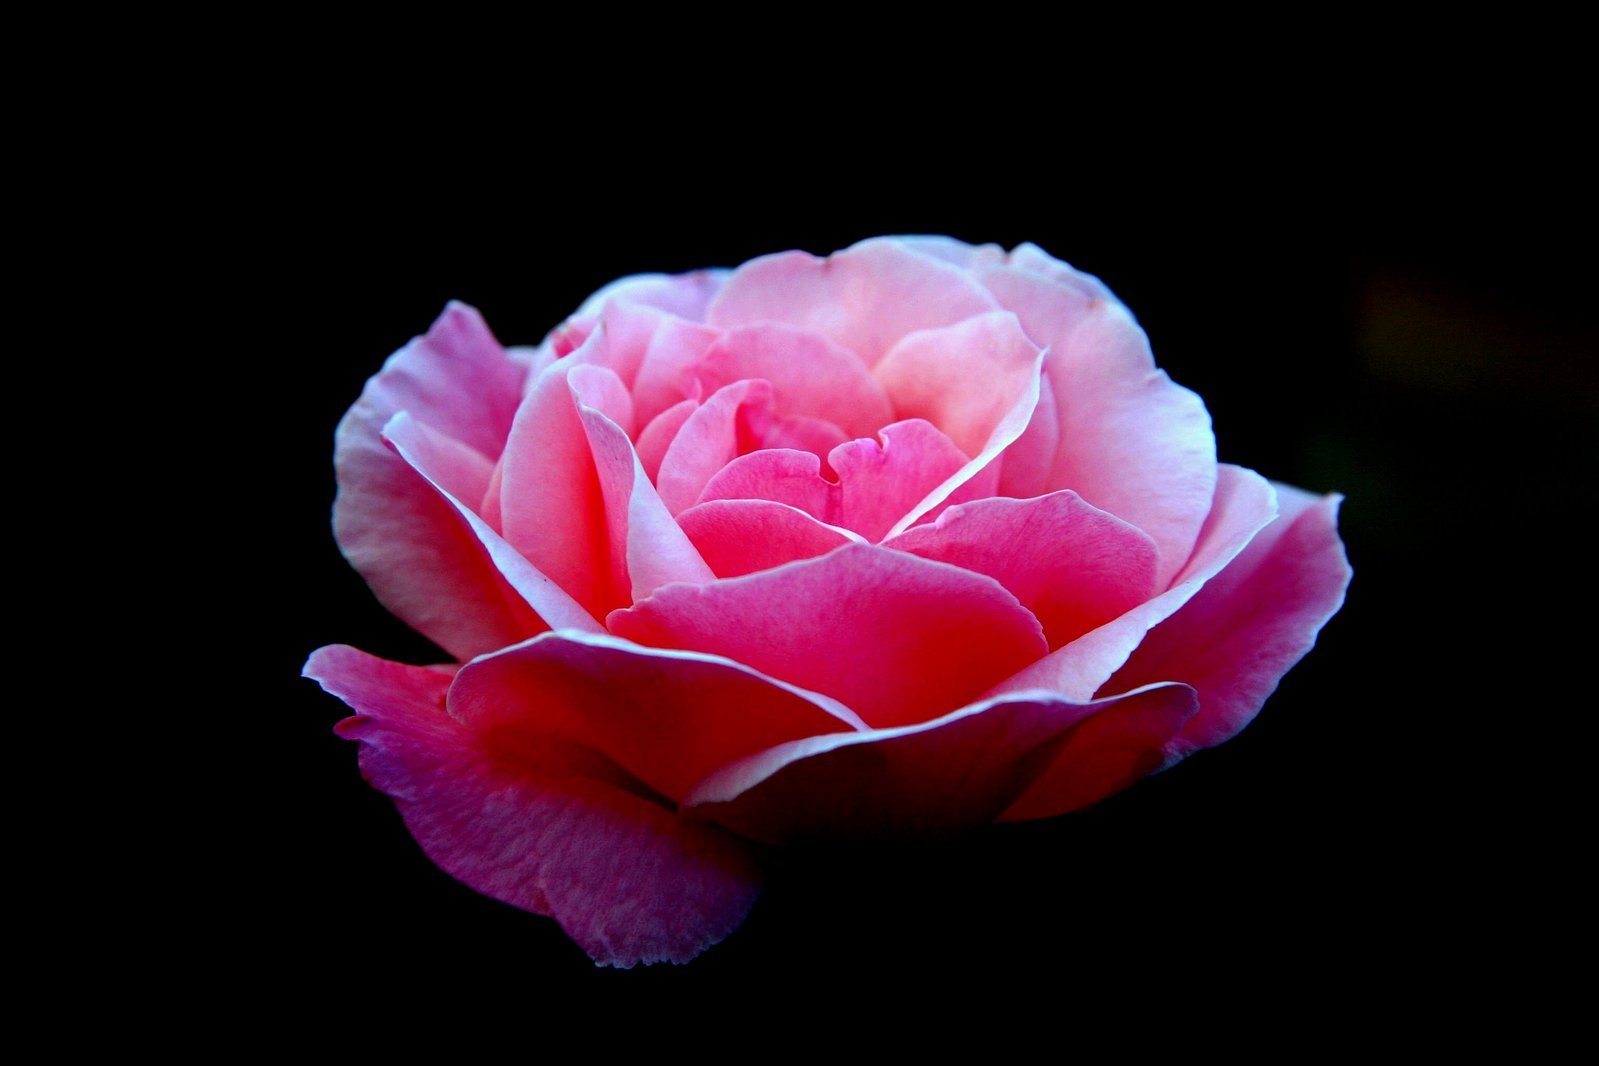 a pink rose is shown against a black background